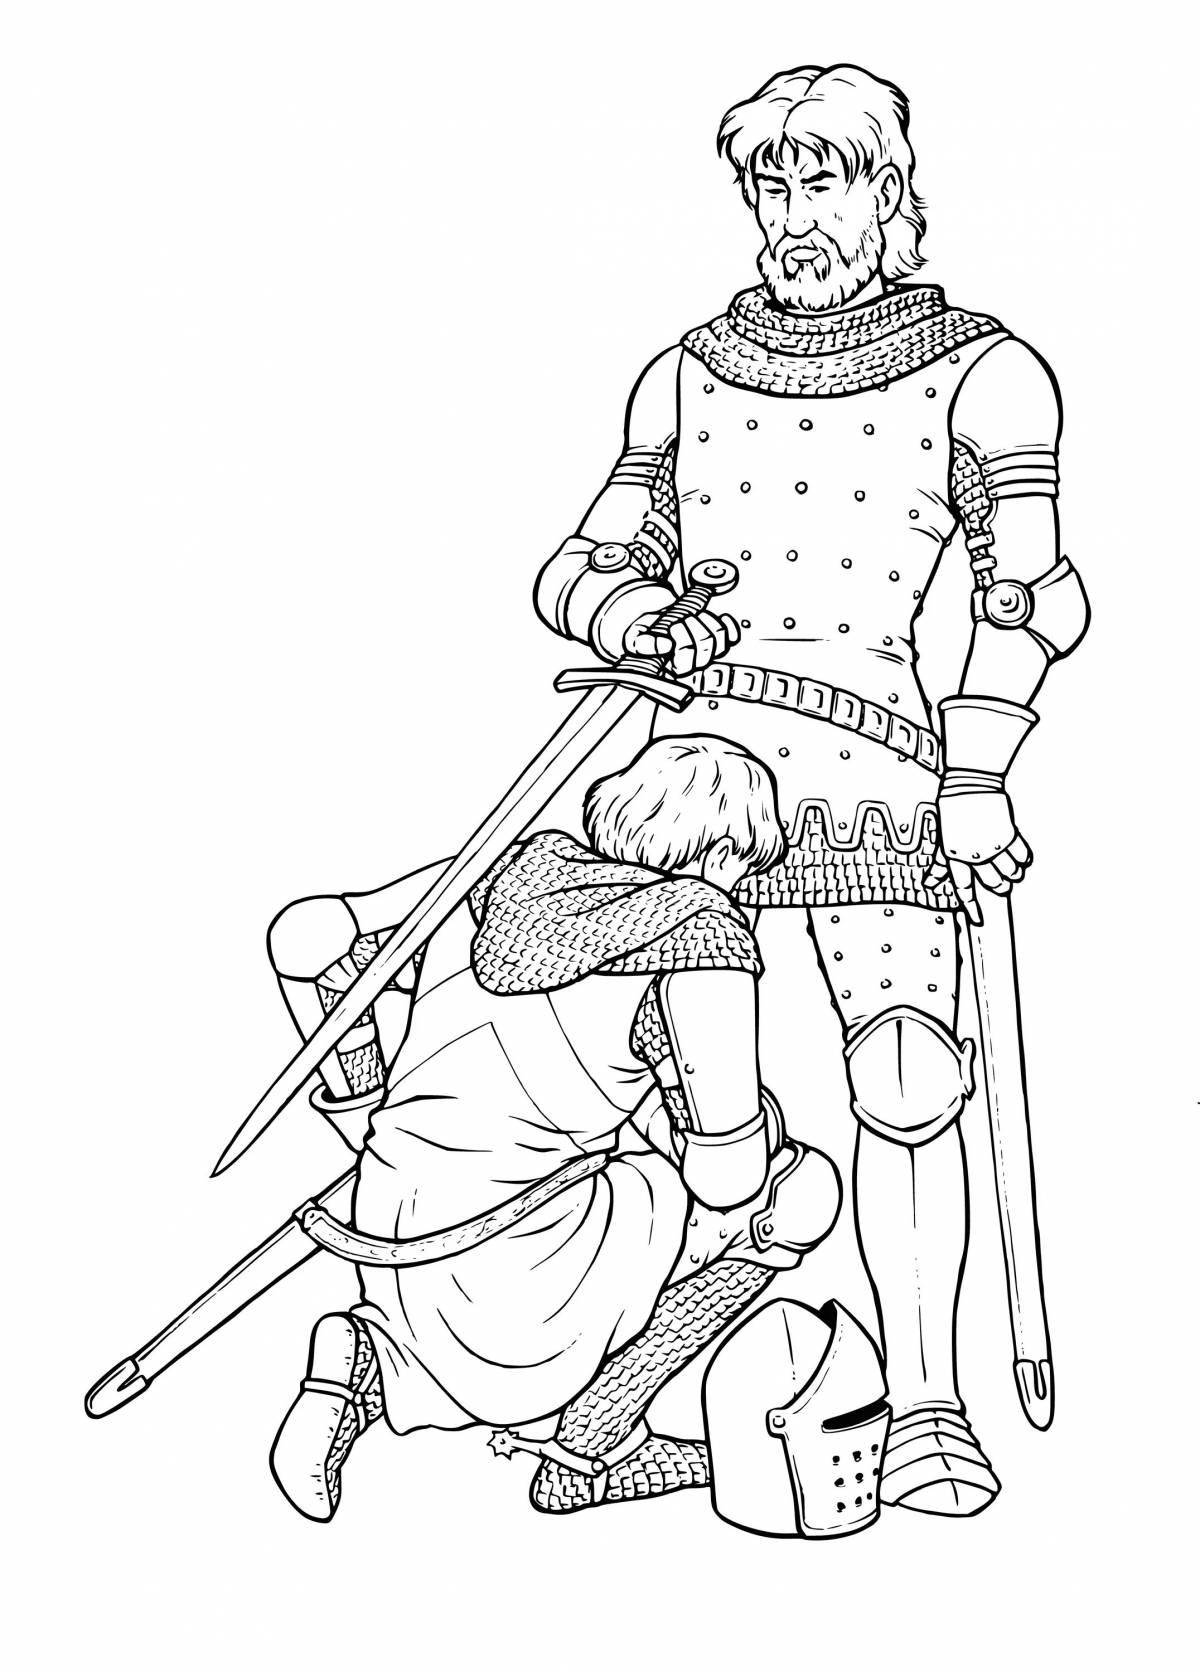 Luxury medieval knights coloring book